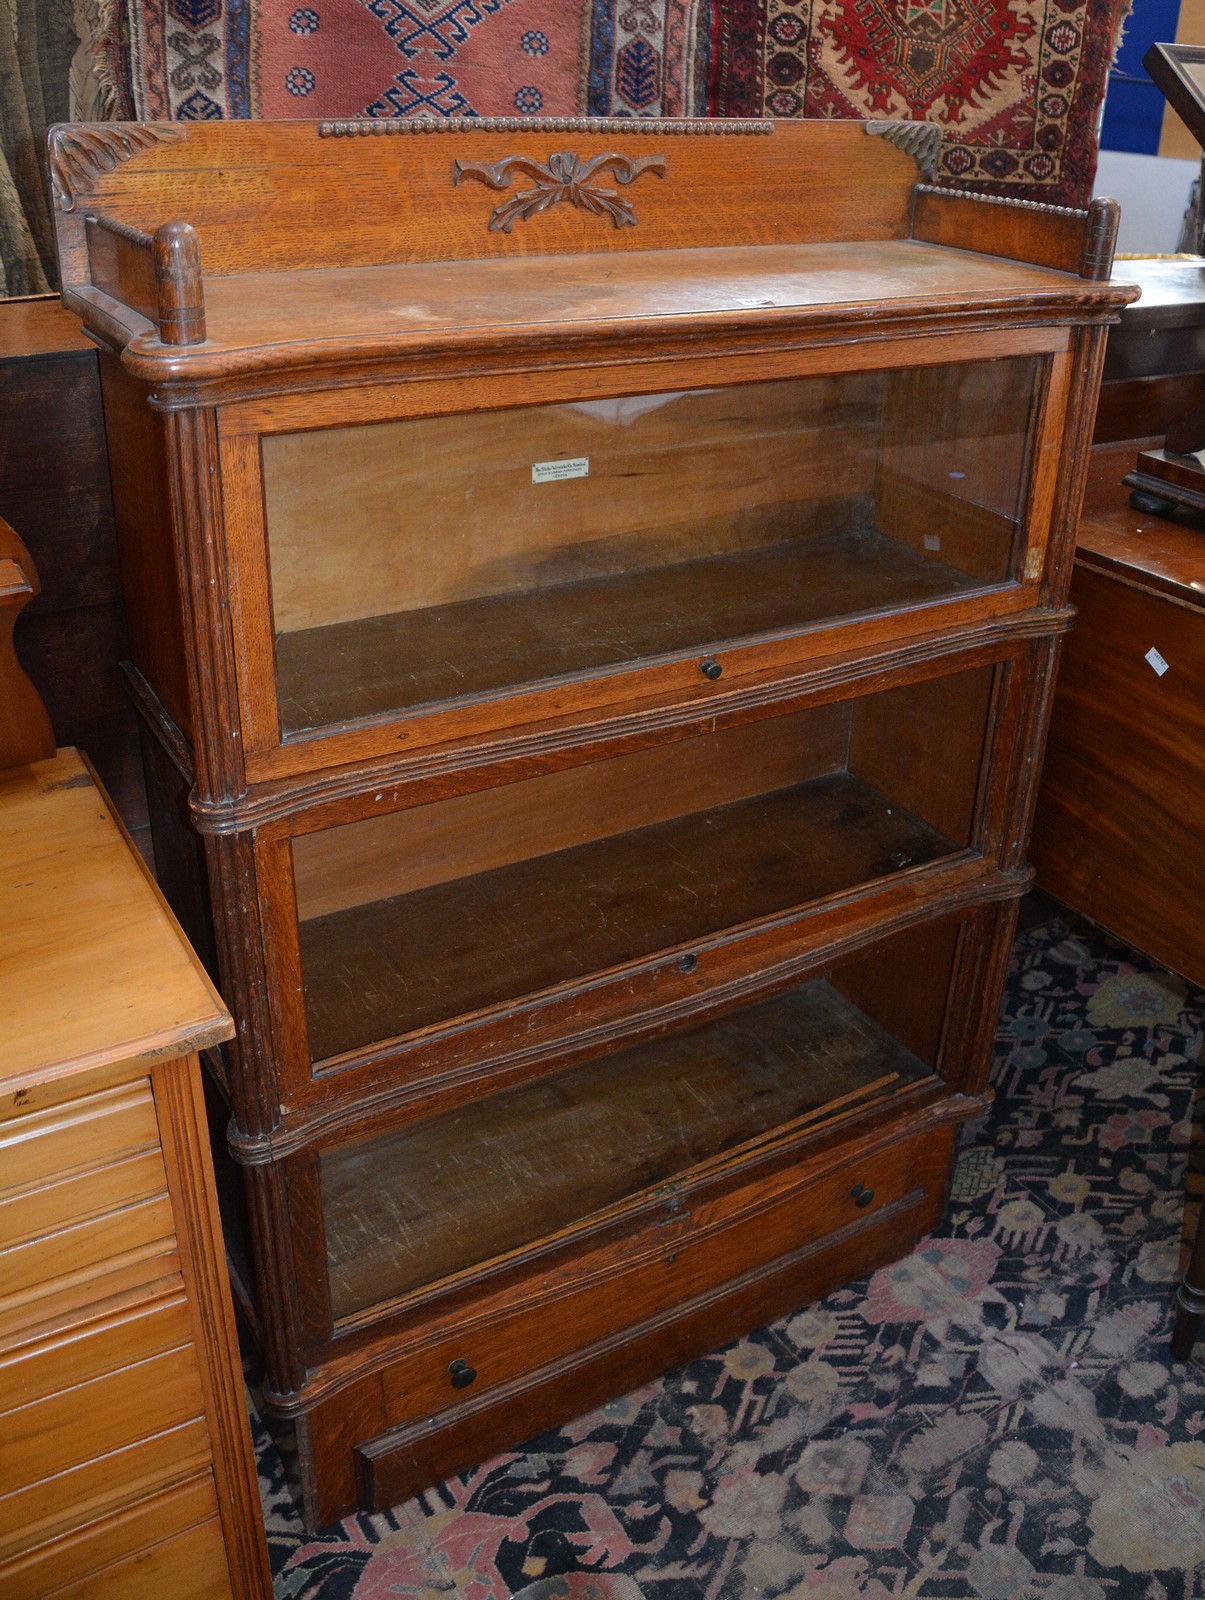 A Globe Wernicke three section bookcase with drawer to plinth base 130cm high, 90cm wide, 32cm